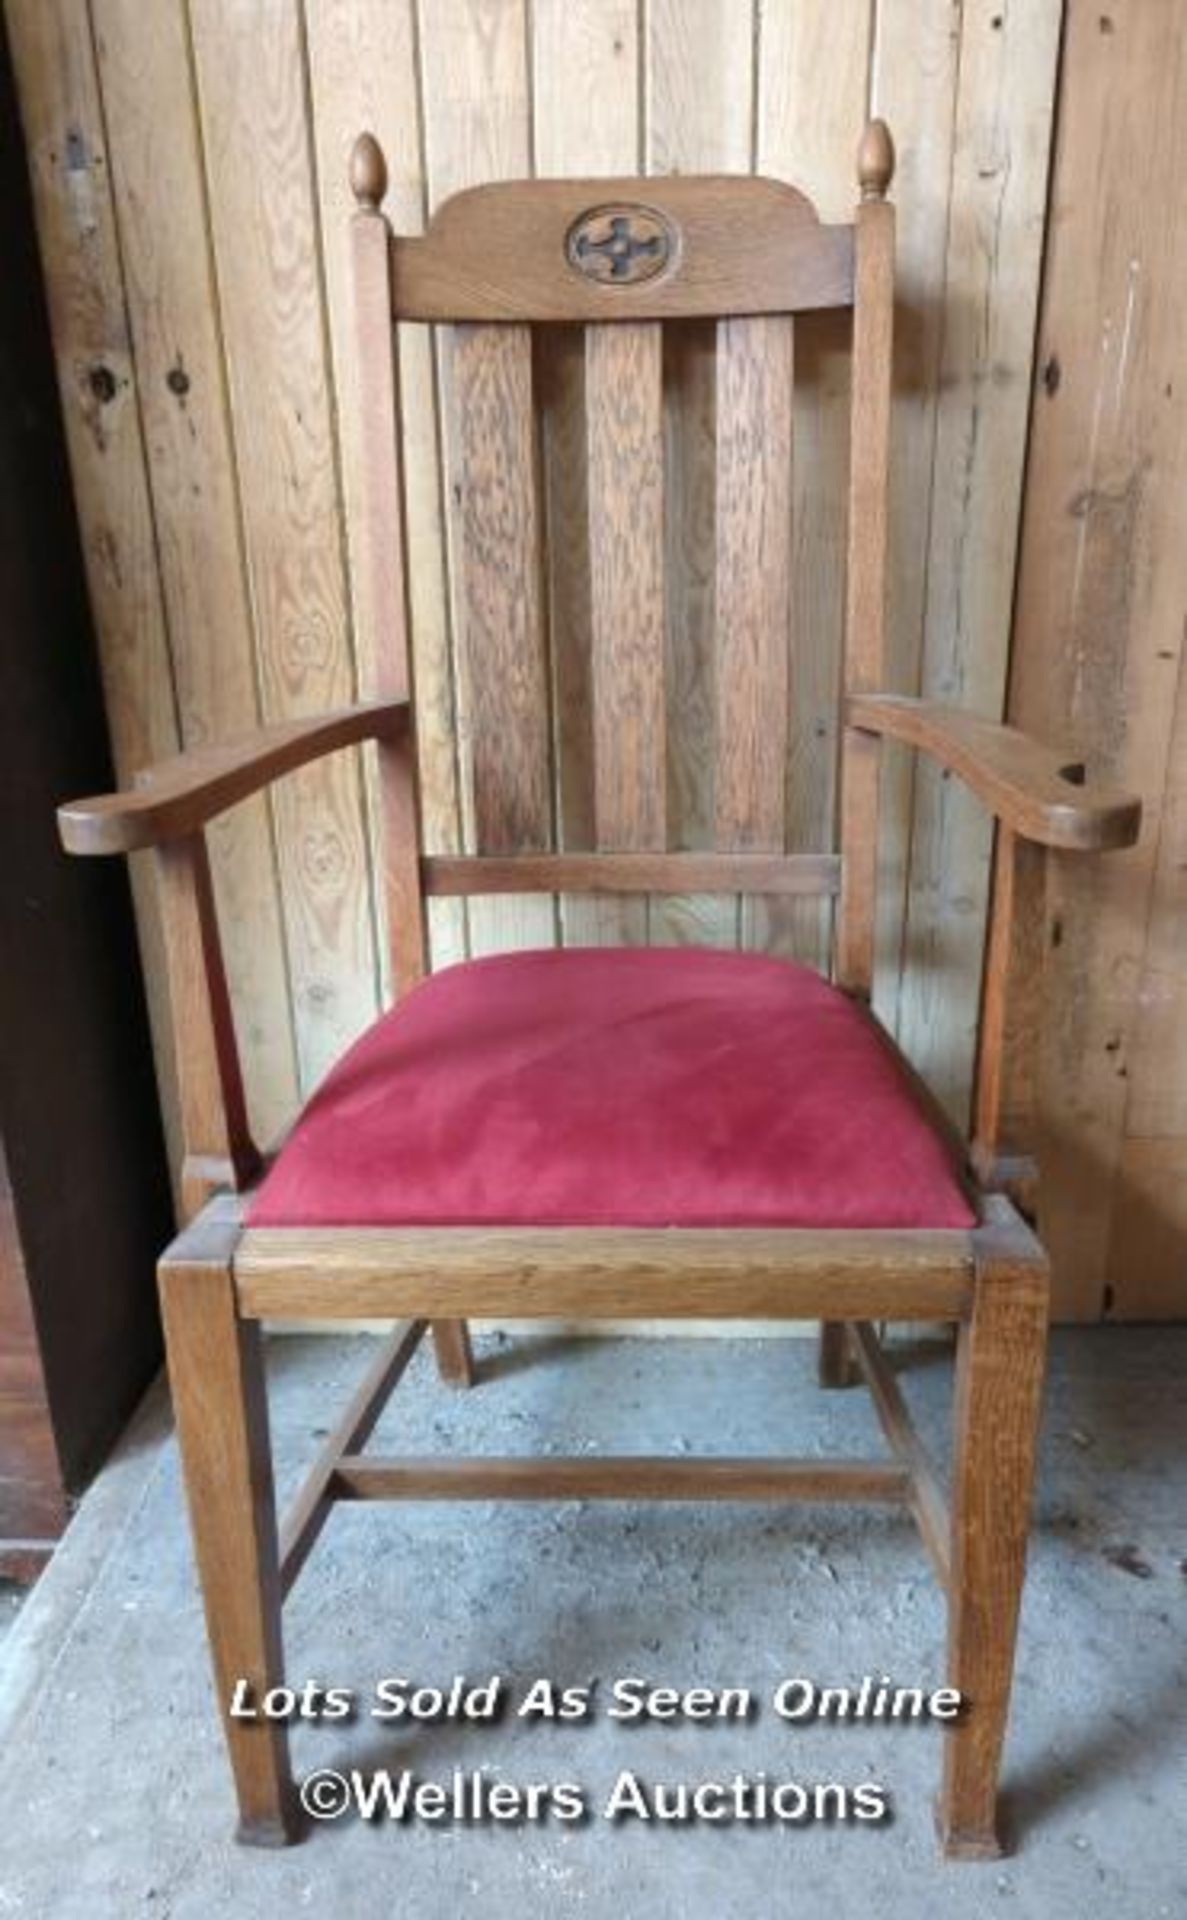 Oak arts and crafts carved high back chair. Cushion seat. 113cm high. Good condition